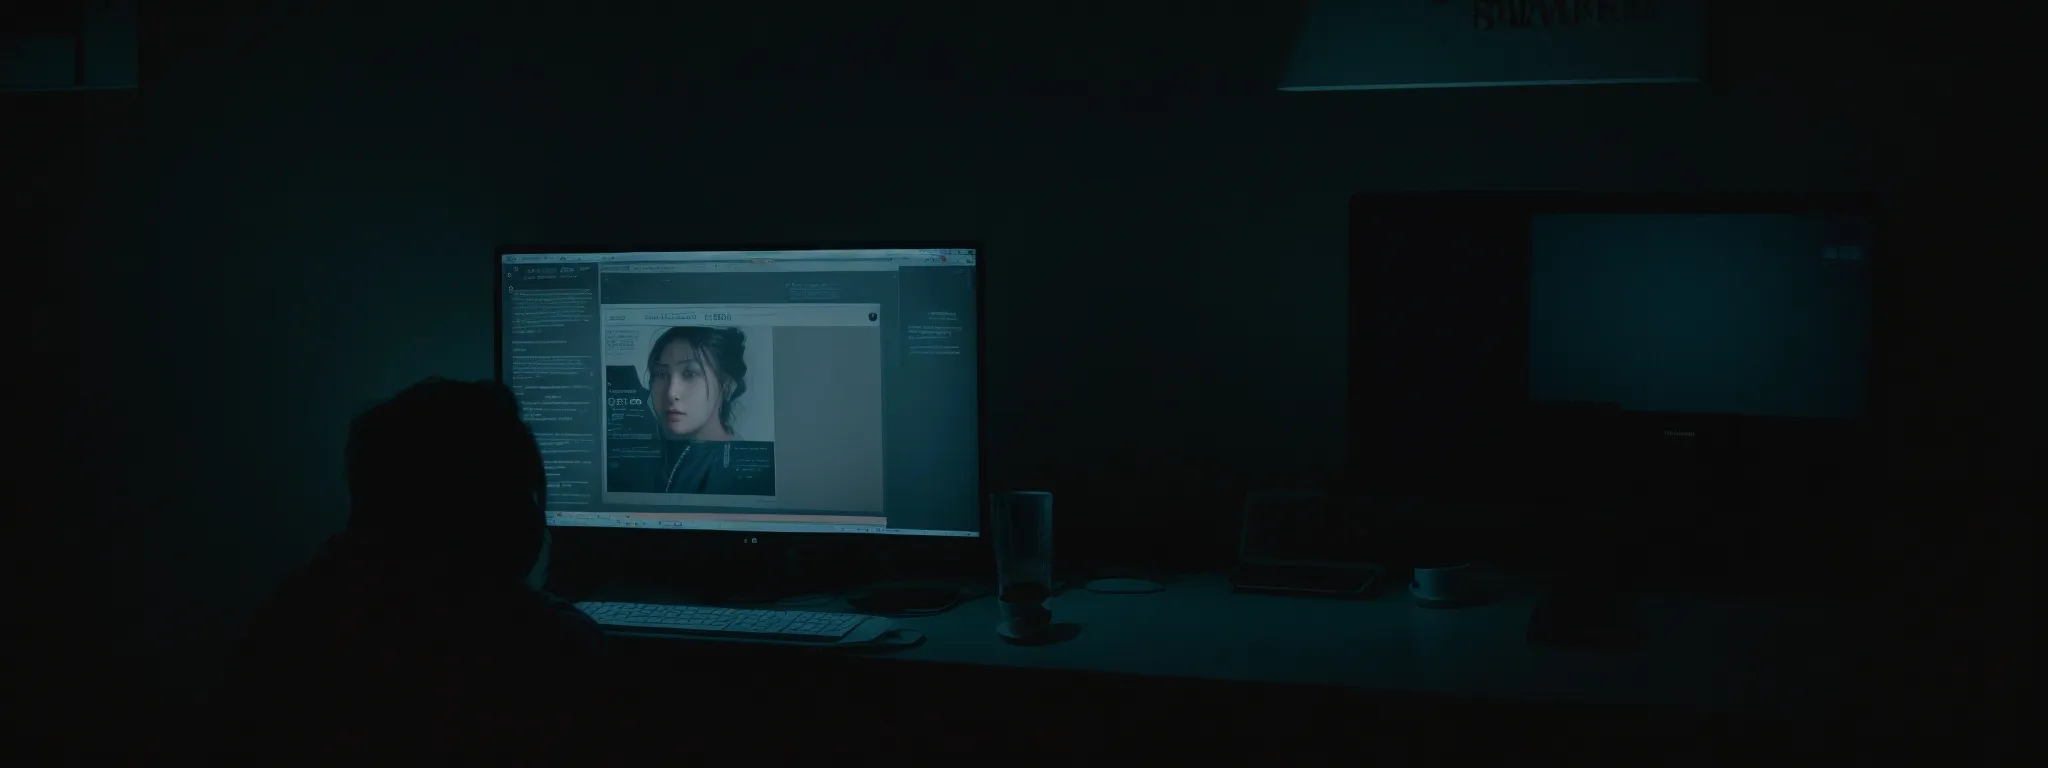 a person with an illuminated face is intently reading captivating headlines on a computer screen in a dark room.